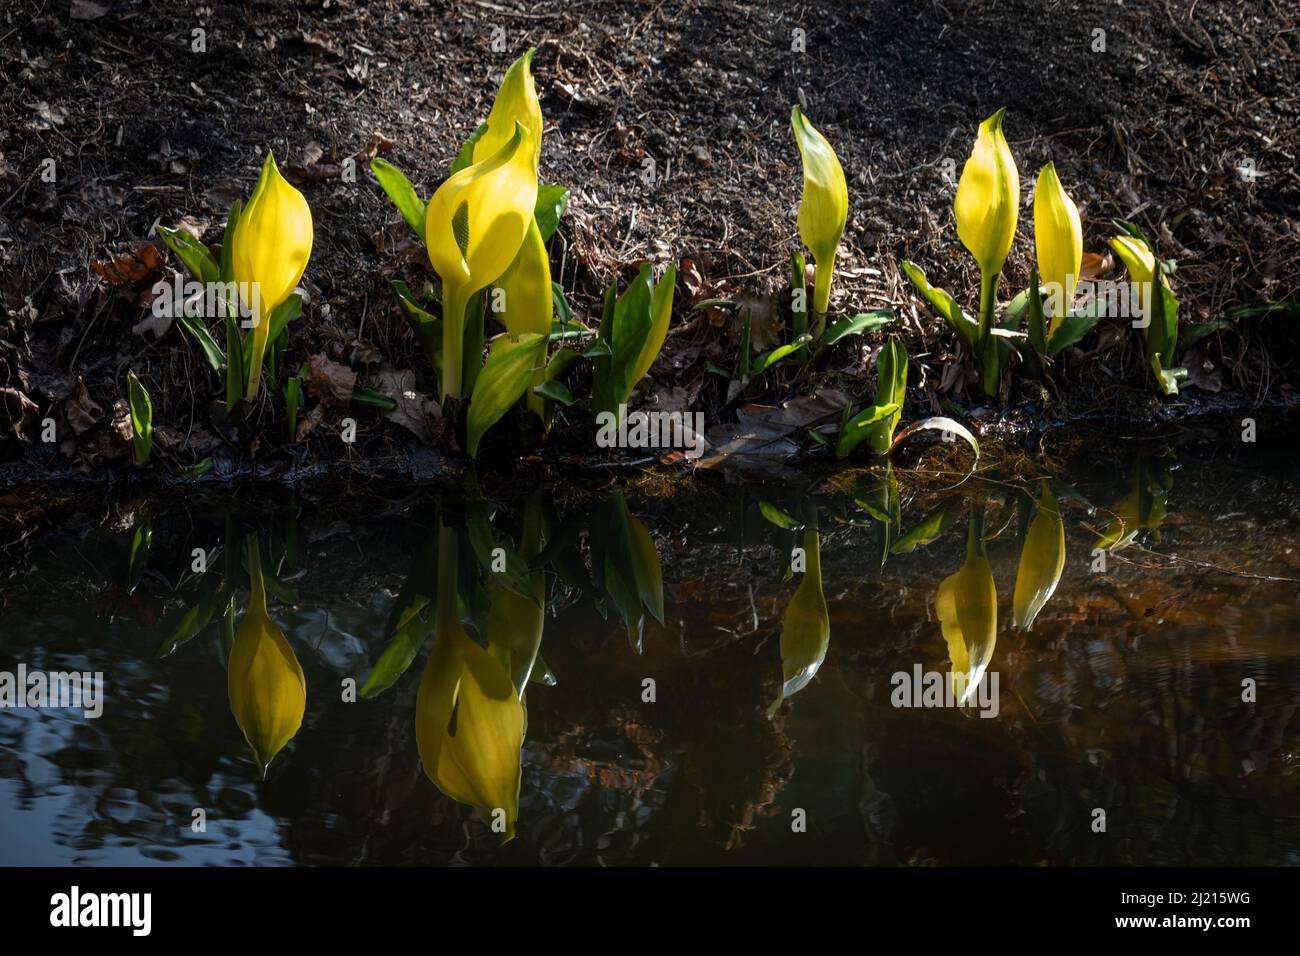 Young Lysichiton americanus plants, Skunk cabbage, mirroring in the water in springtime Stock Photo